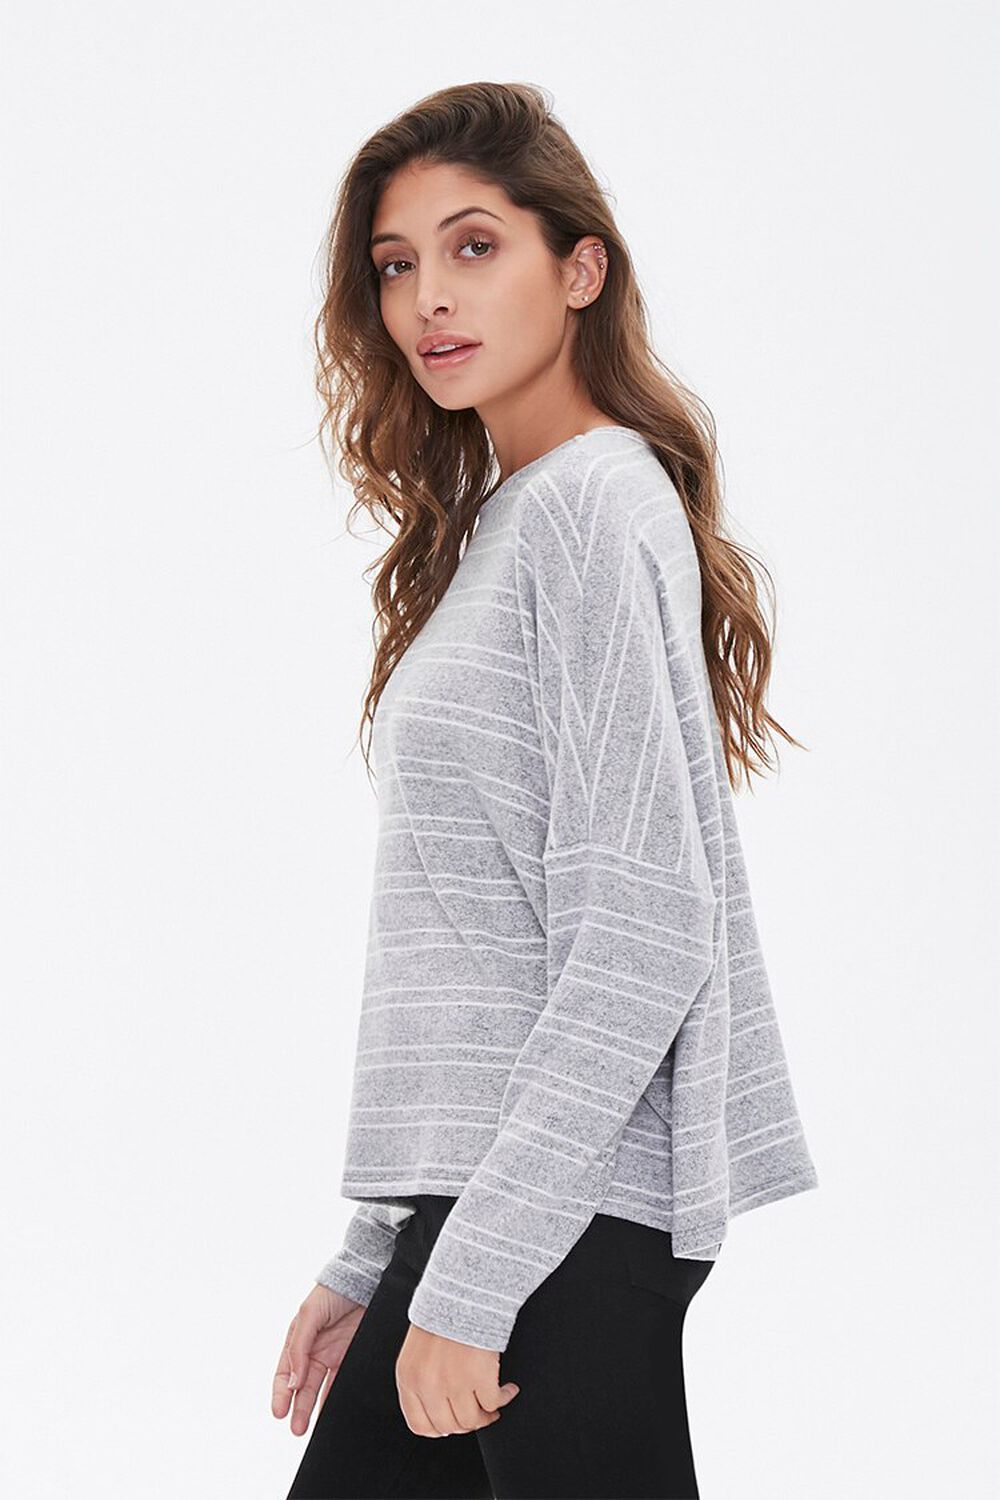 HEATHER GREY/WHITE Striped Drop-Sleeve Top, image 2